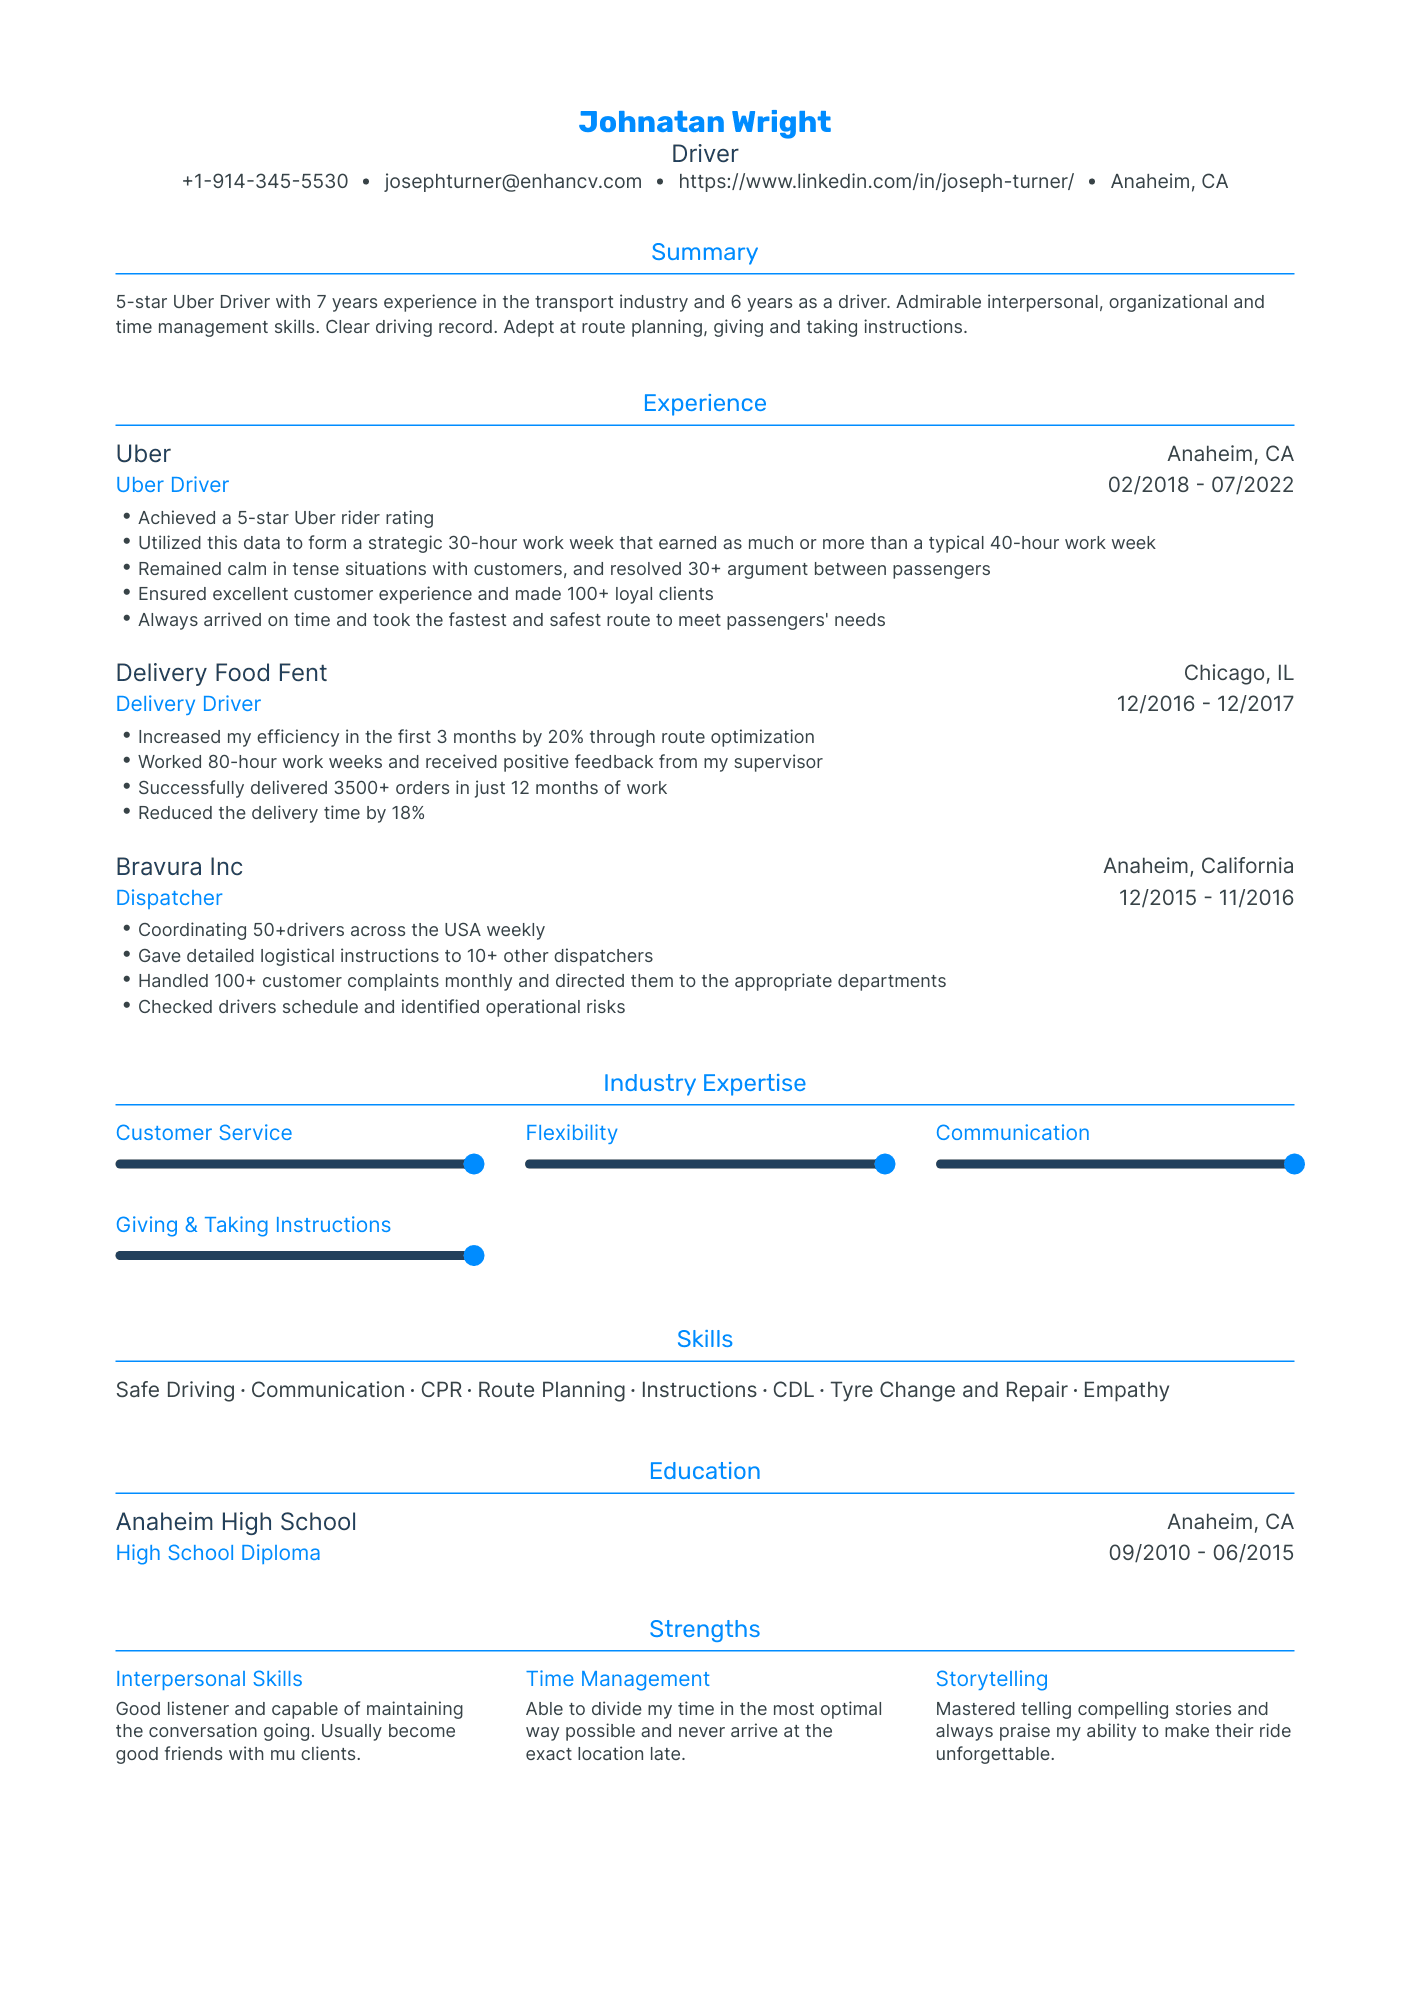 Traditional Uber Driver Resume Template